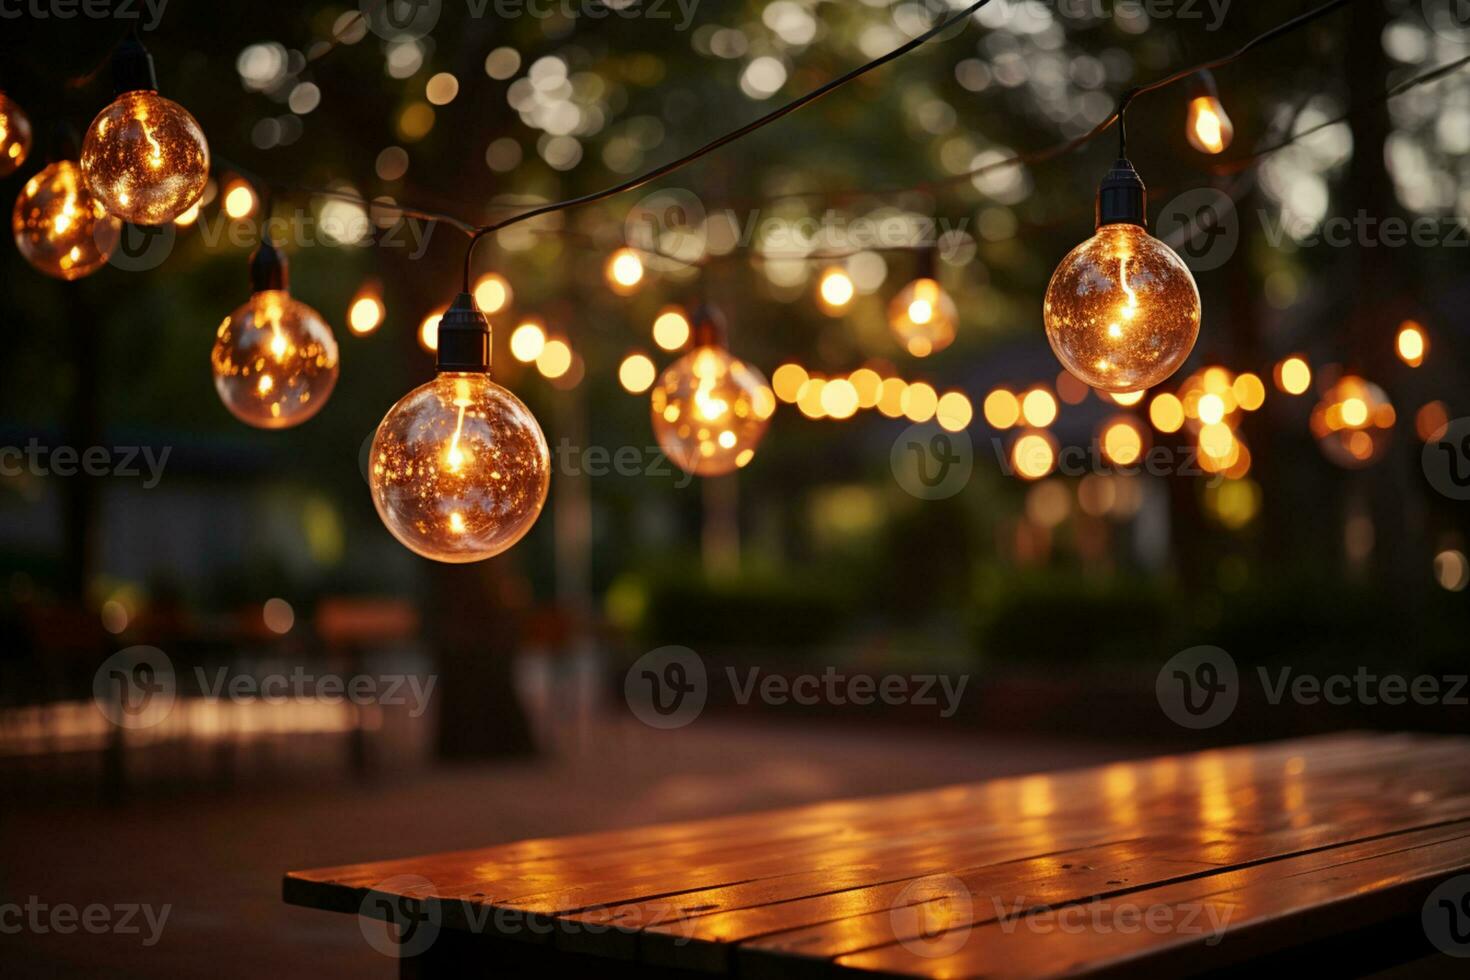 Festive outdoor string lights adorn a garden with blurred silhouettes